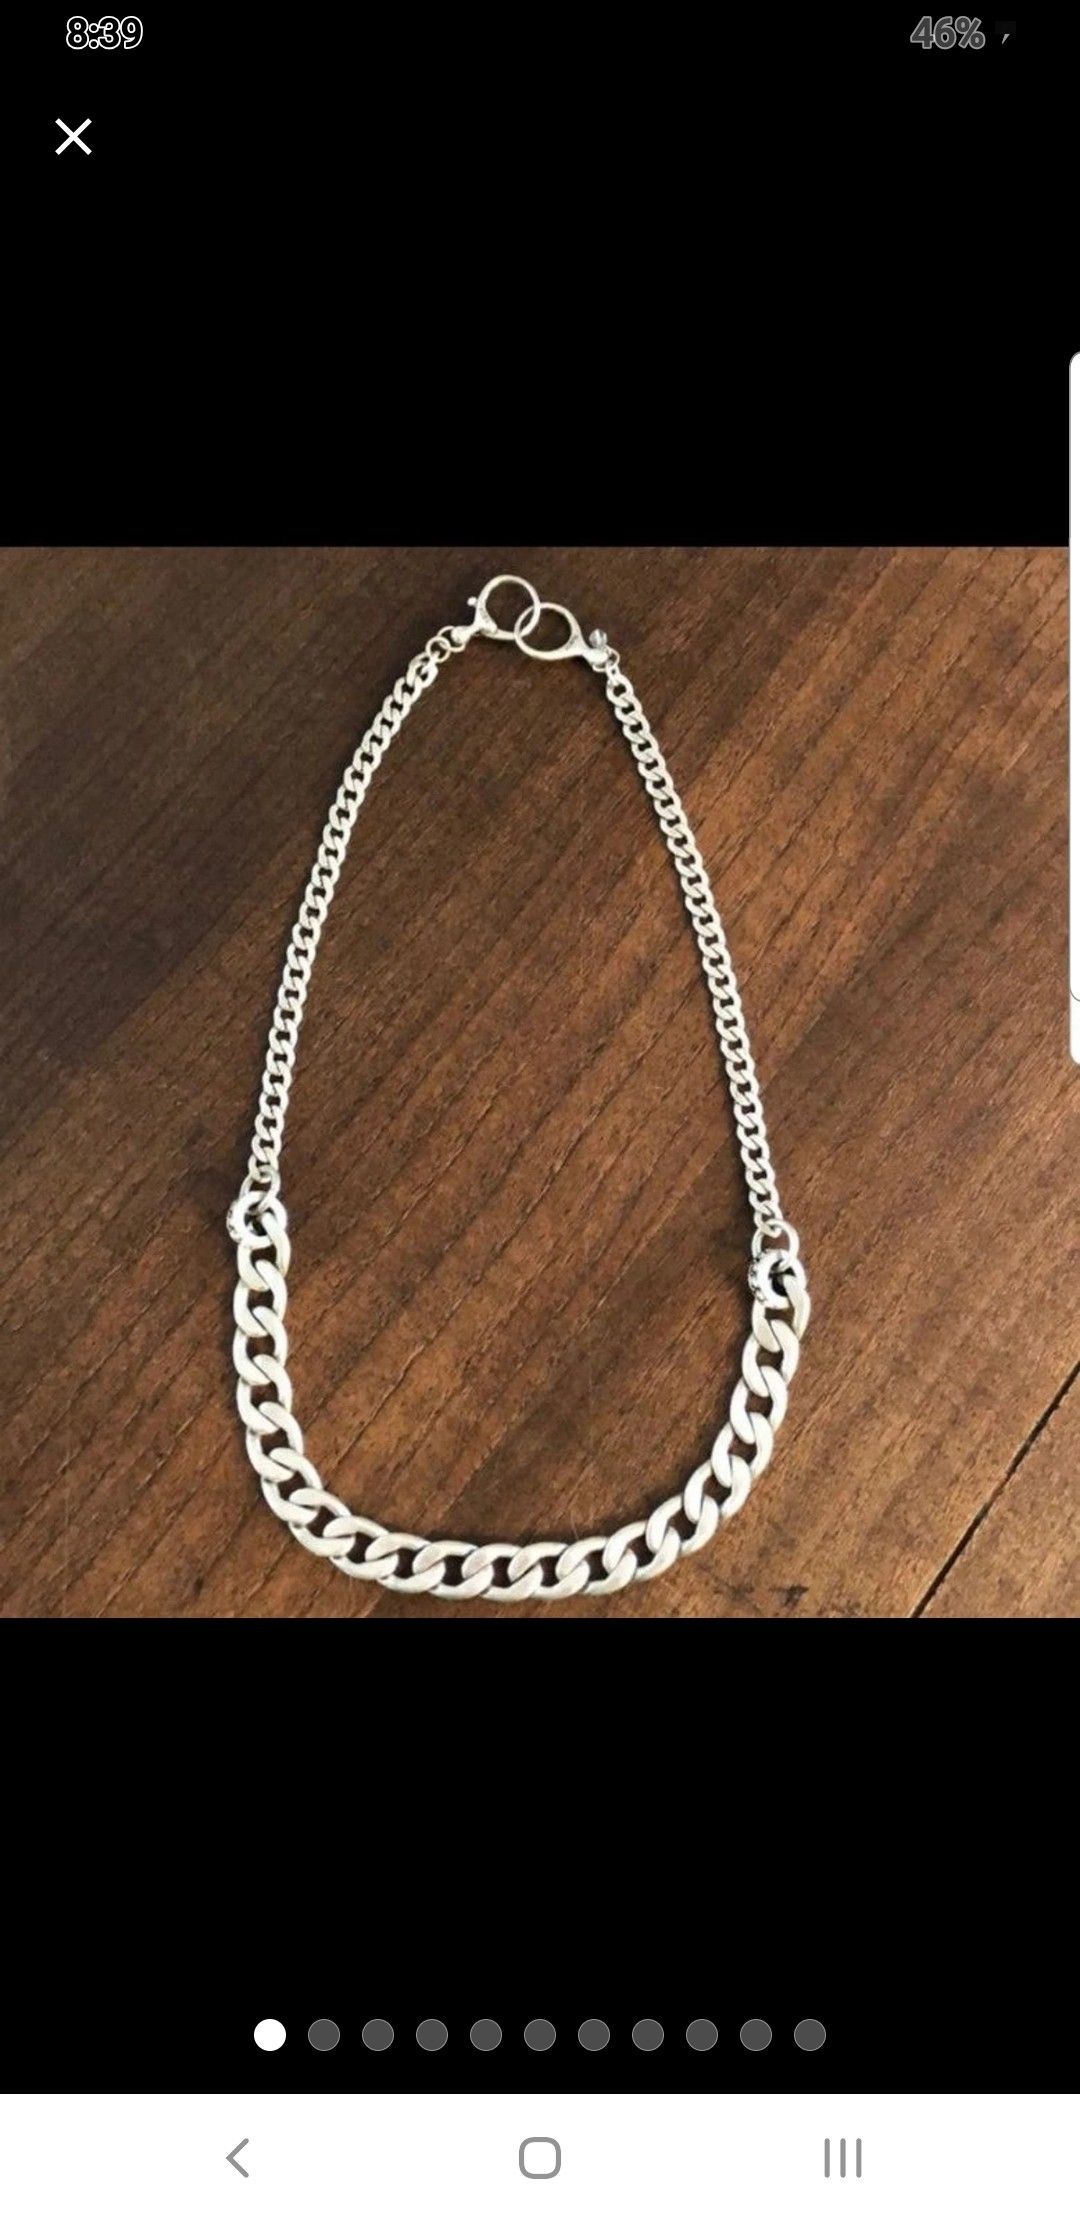 WOMANS FOSSIL SILVER CHAIN LINK NECKLACE.